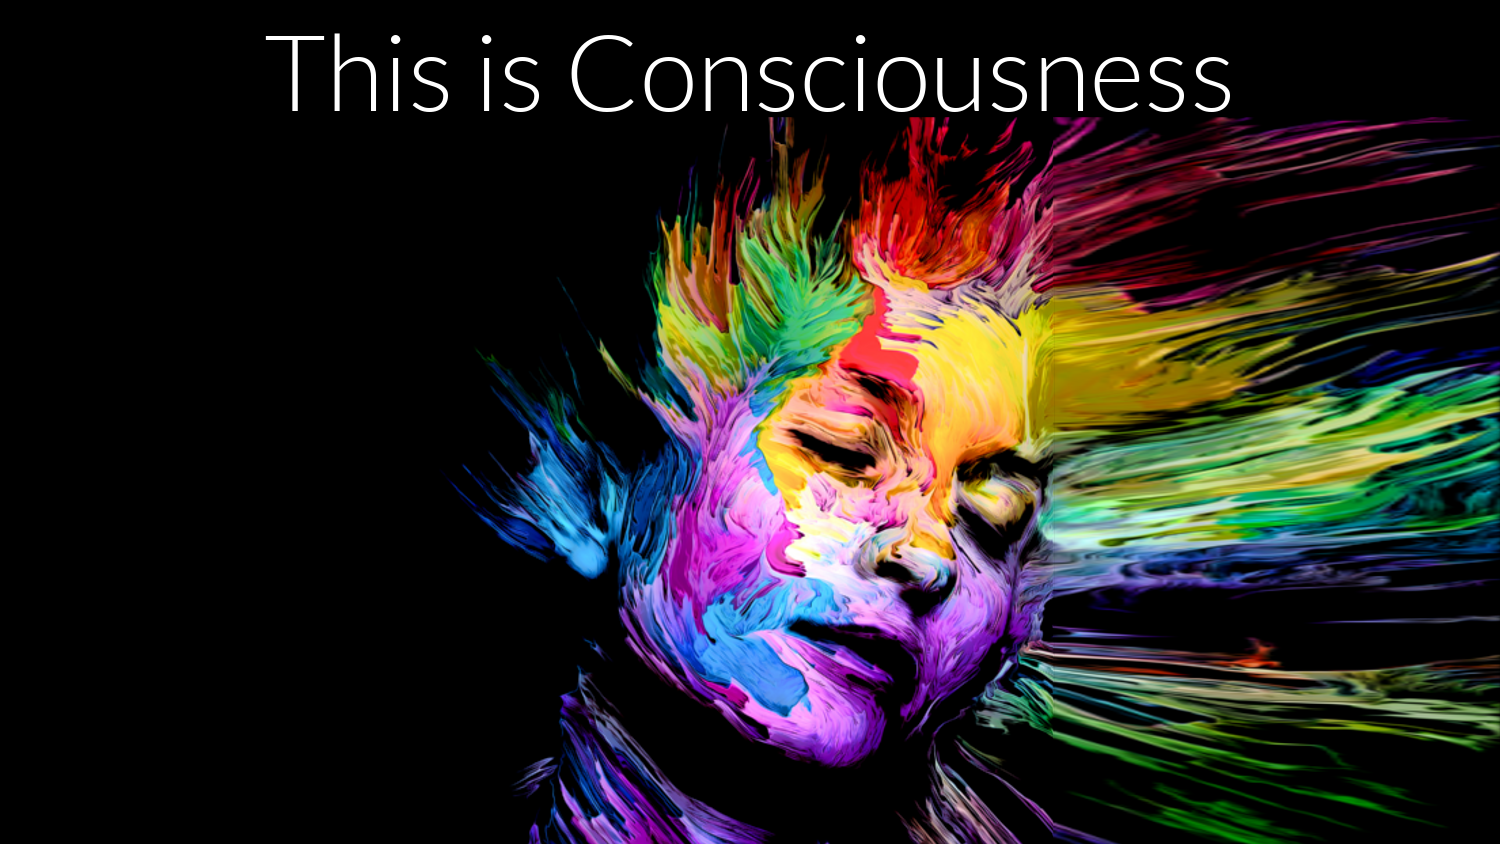 This is Consciousness